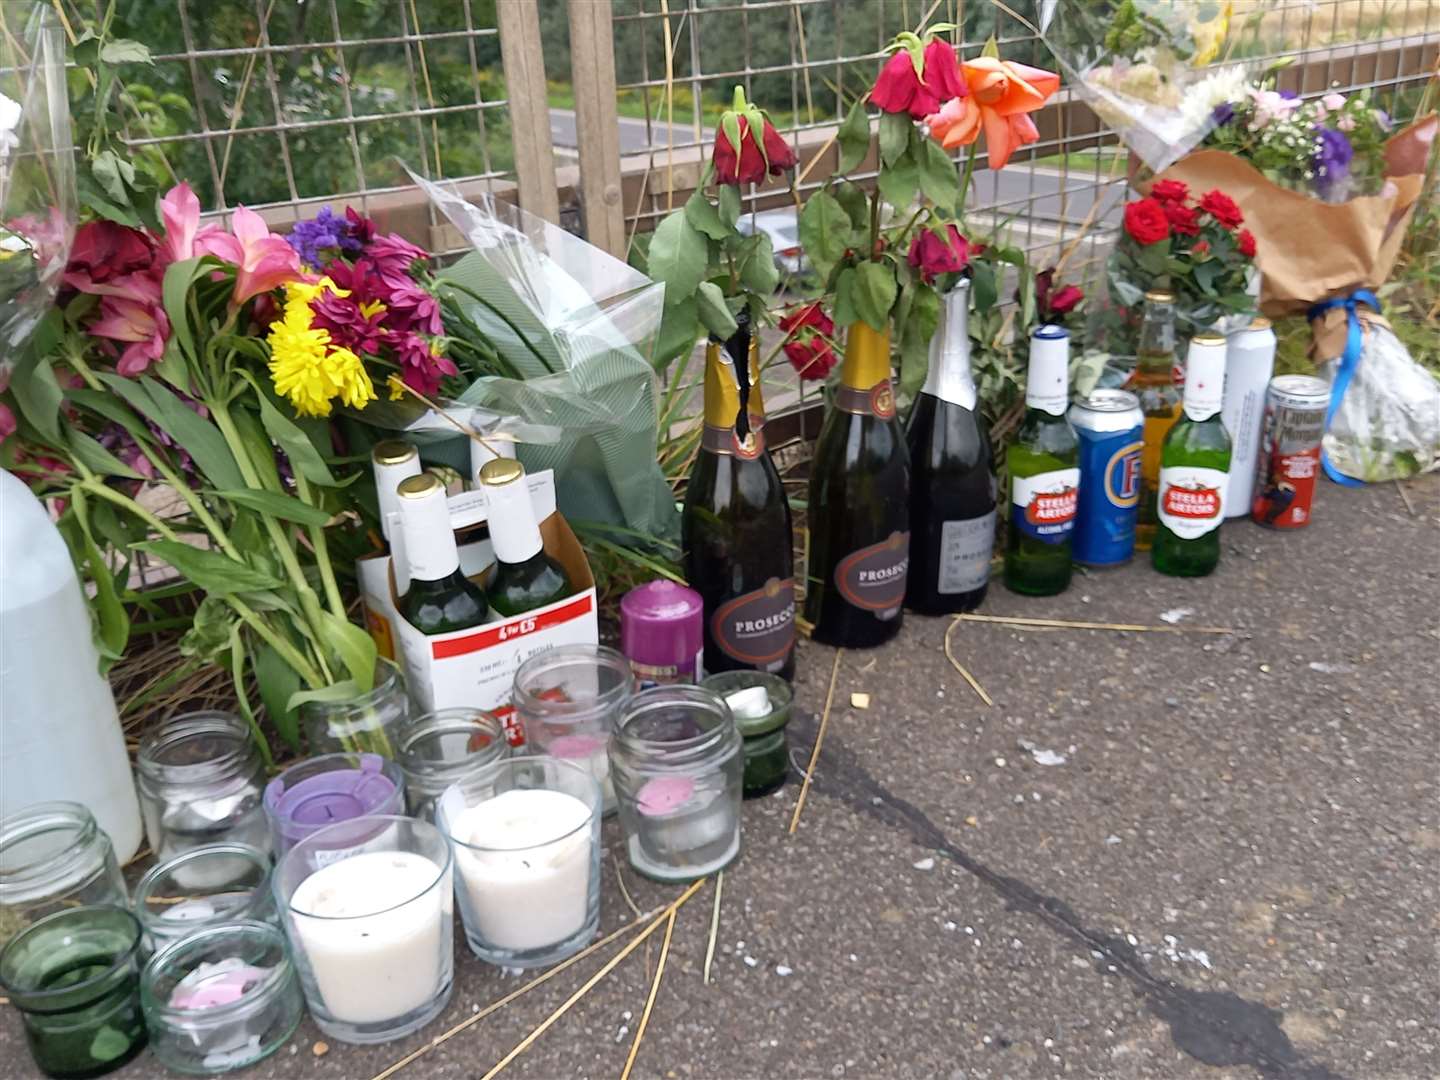 Bottles of alcohol left at the scene of Lee Harlow's tragic death